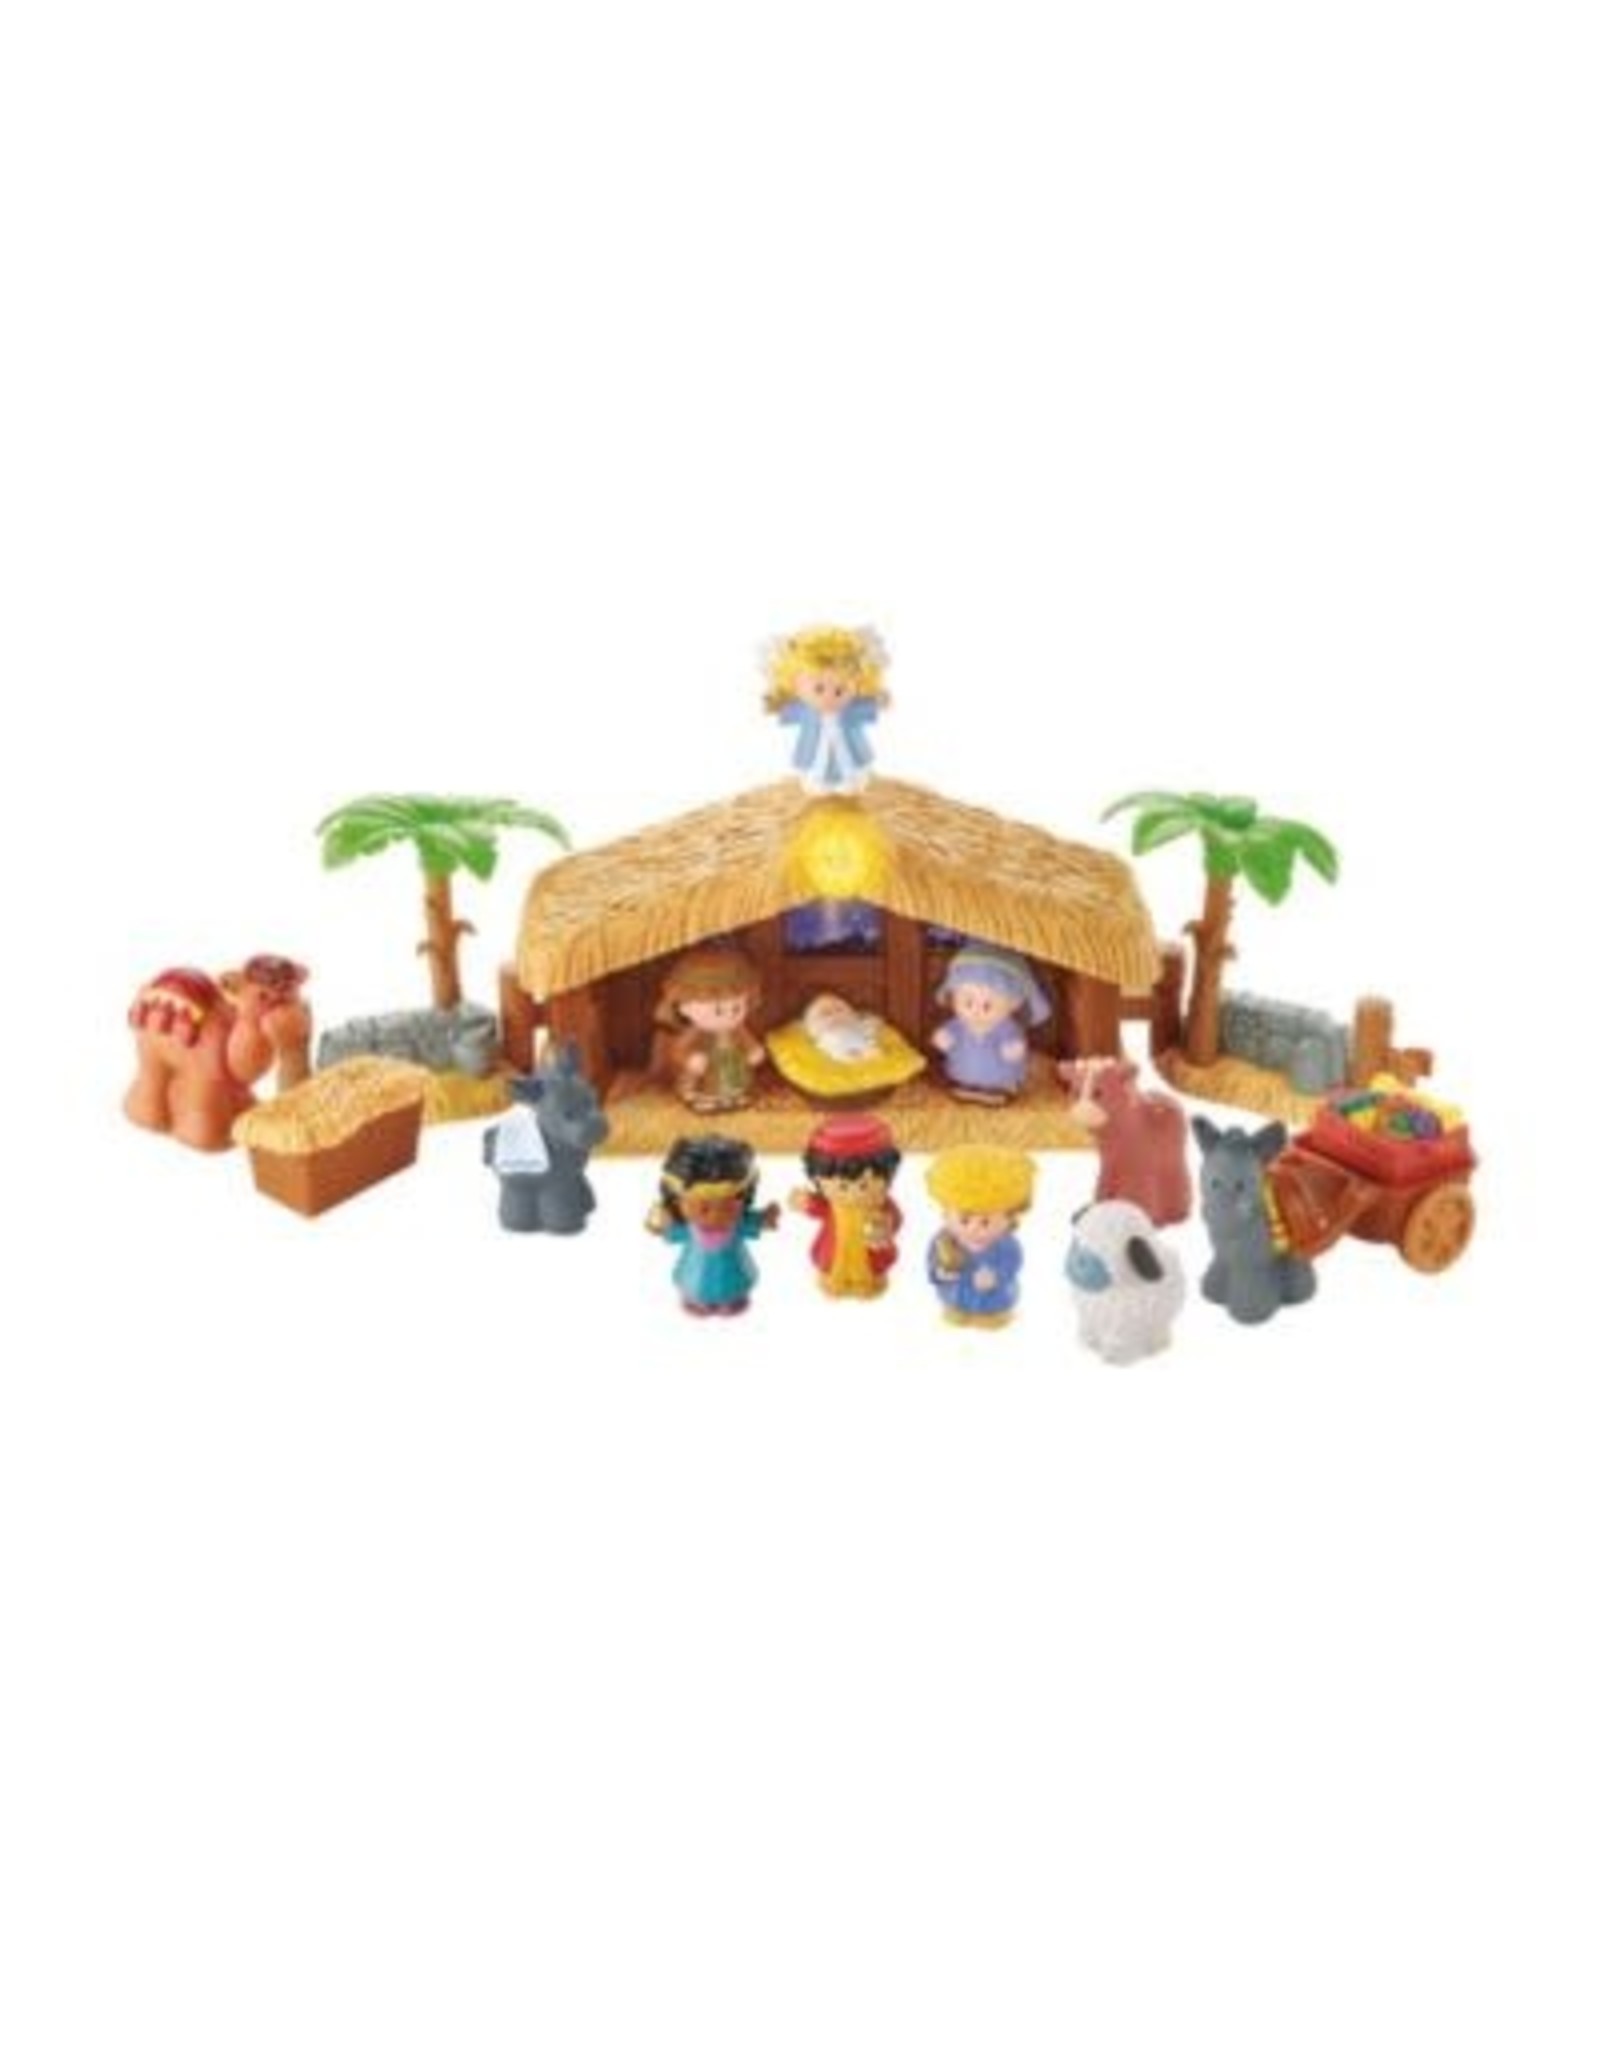 Fisher Price Little People Fisher Price Deluxe Christmas Story Nativity Set